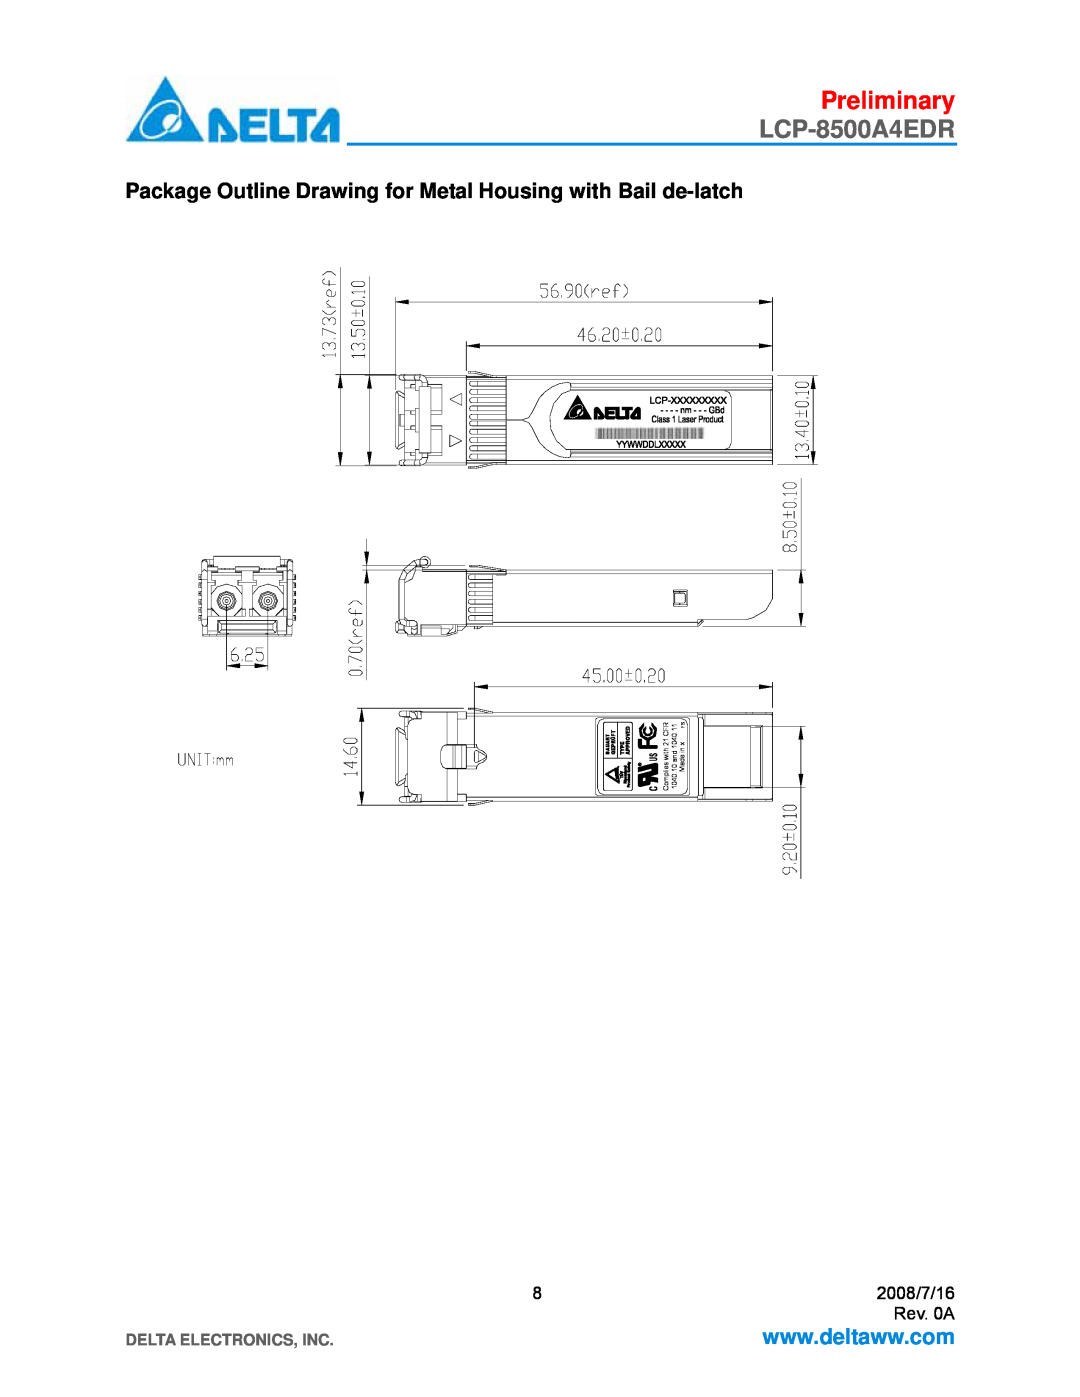 Delta Electronics LCP-8500A4EDR manual Package Outline Drawing for Metal Housing with Bail de-latch, Preliminary 